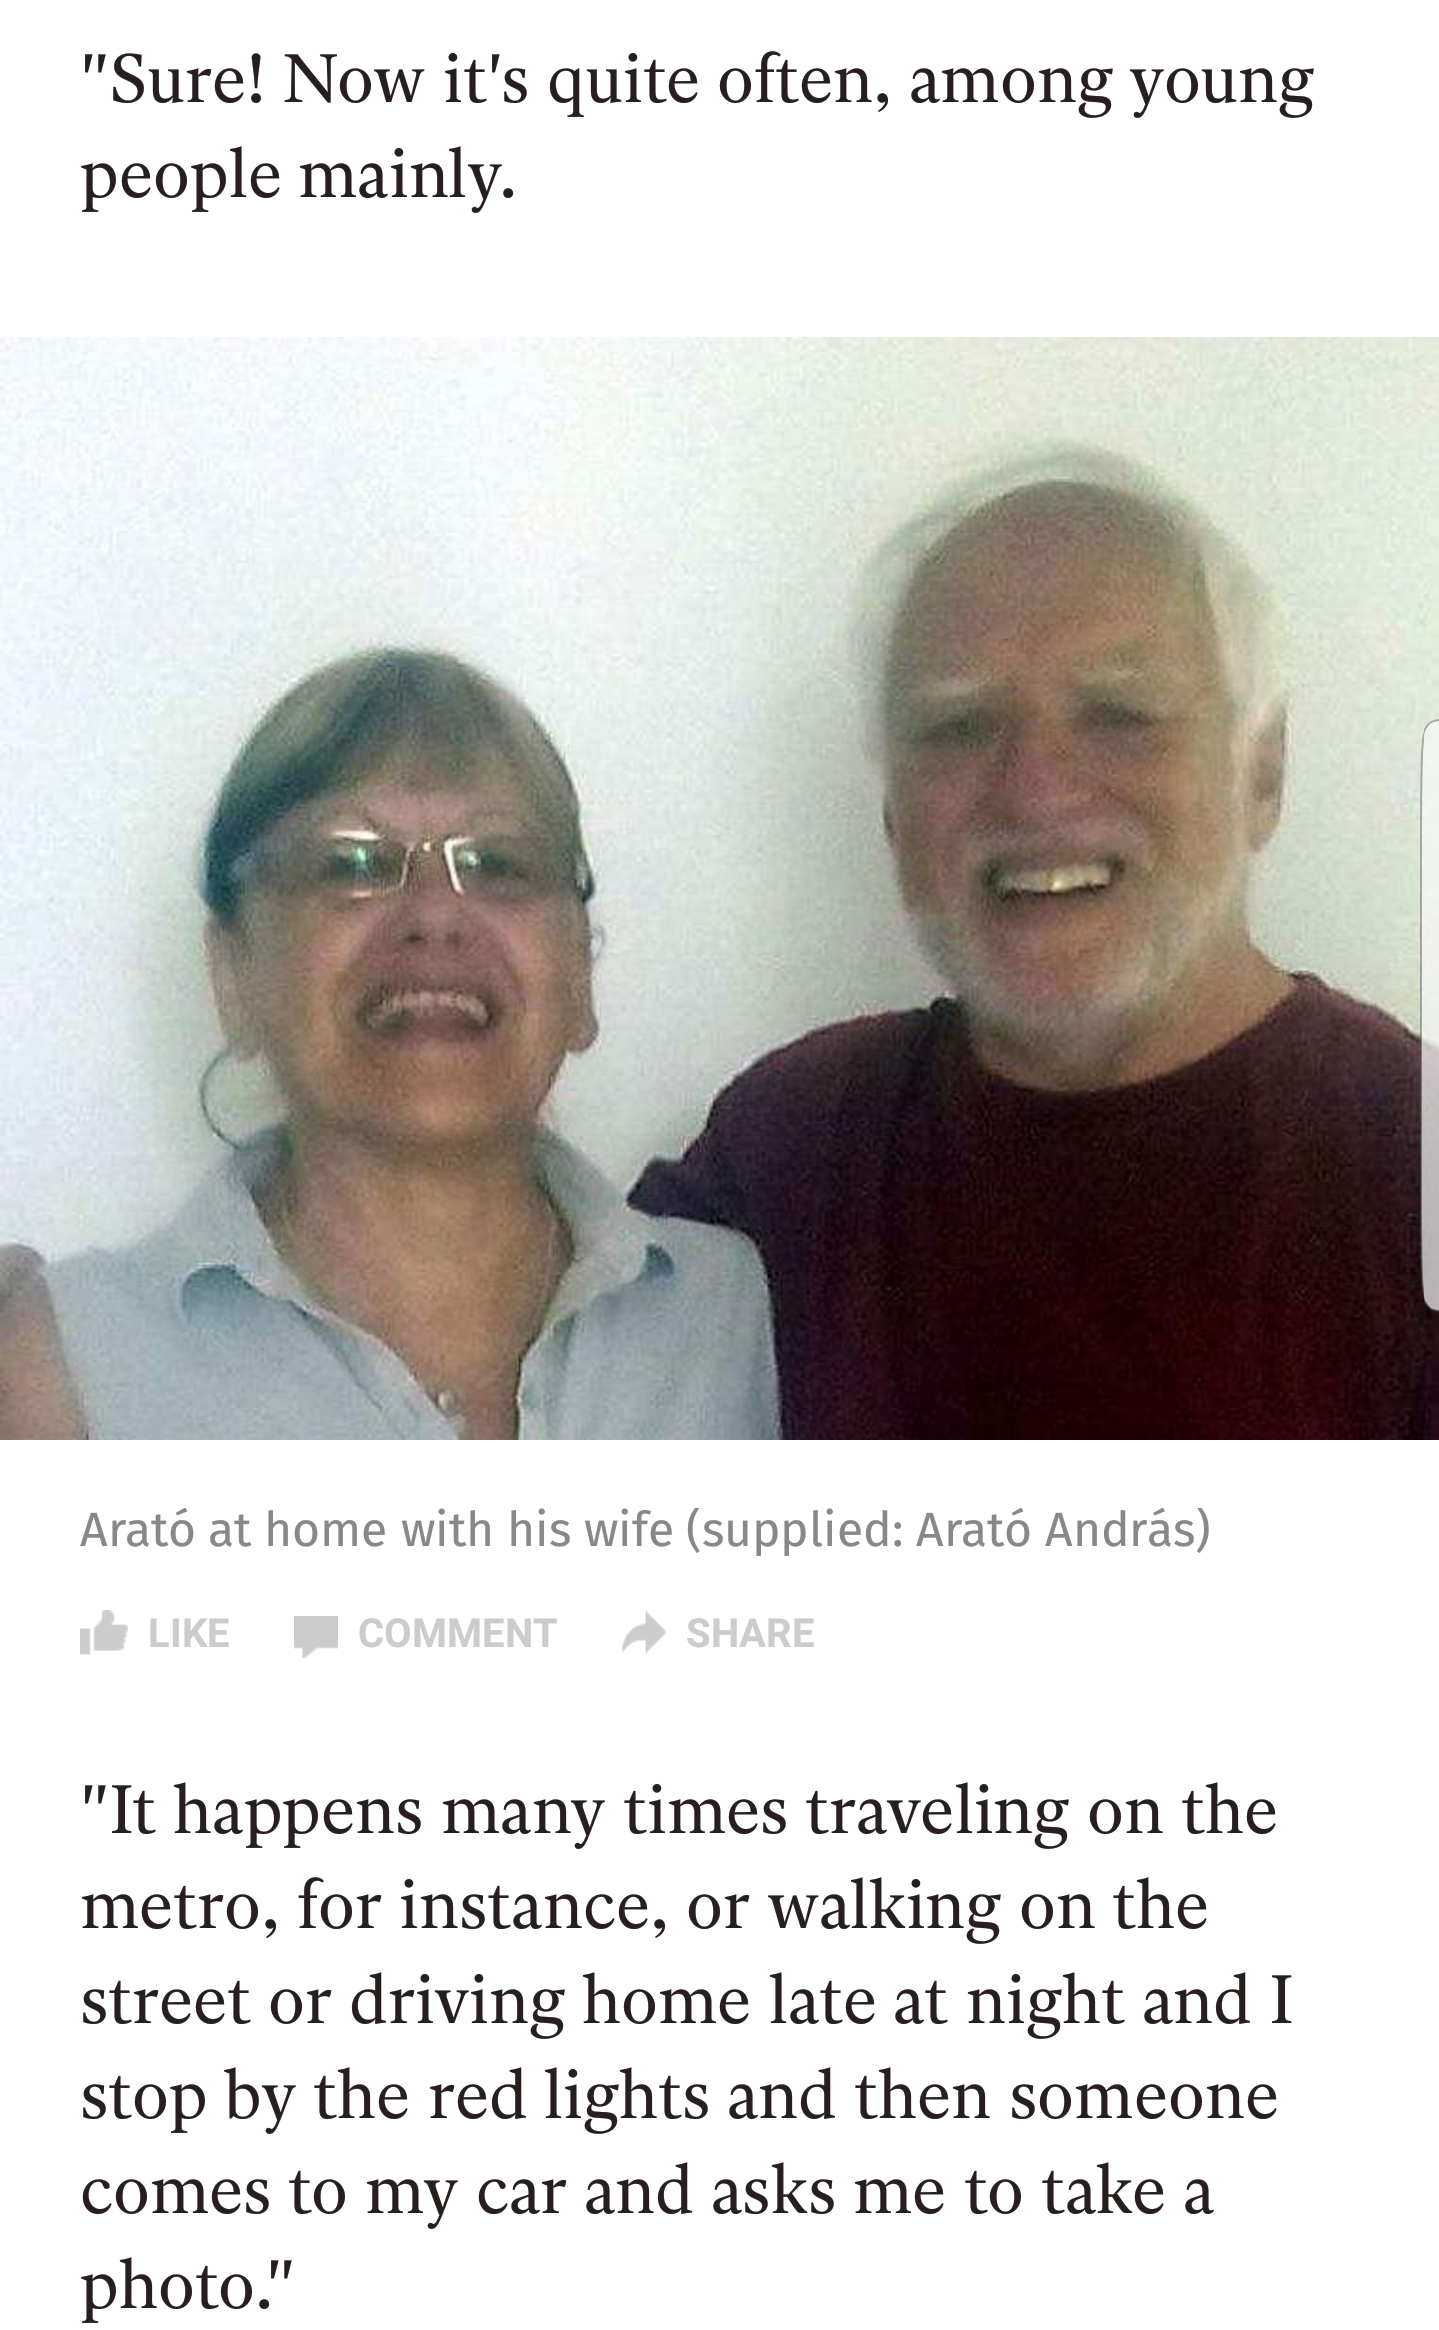 smile - "Sure! Now it's quite often, among young people mainly. Arato at home with his wife supplied Arat Andrs Comment "It happens many times traveling on the metro, for instance, or walking on the street or driving home late at night and I stop by the r